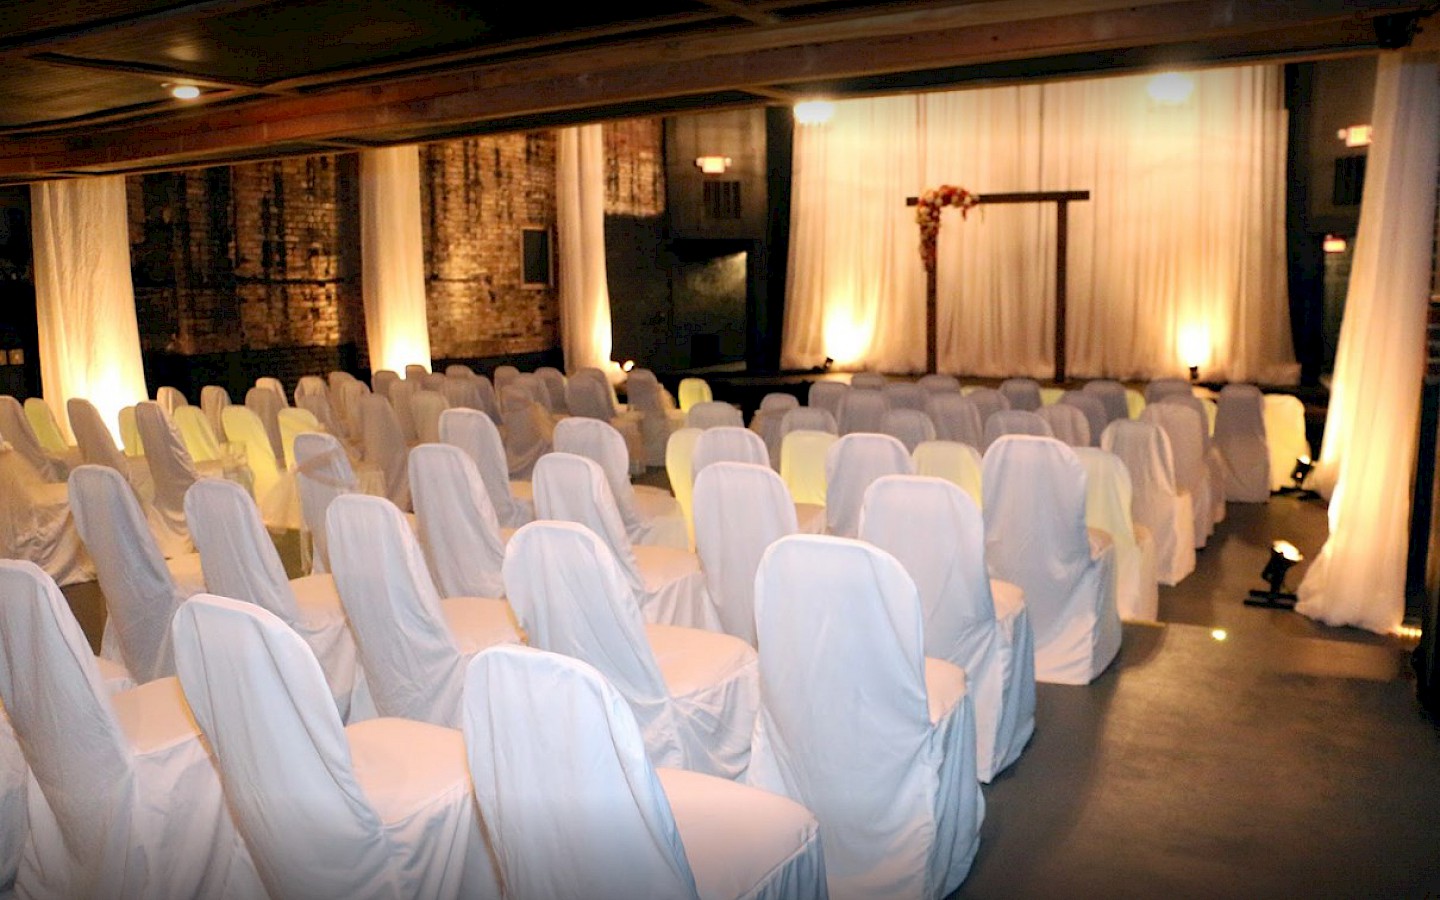 chairs, draped in white satin covers in a candle lit room prepared for a wedding ceremony